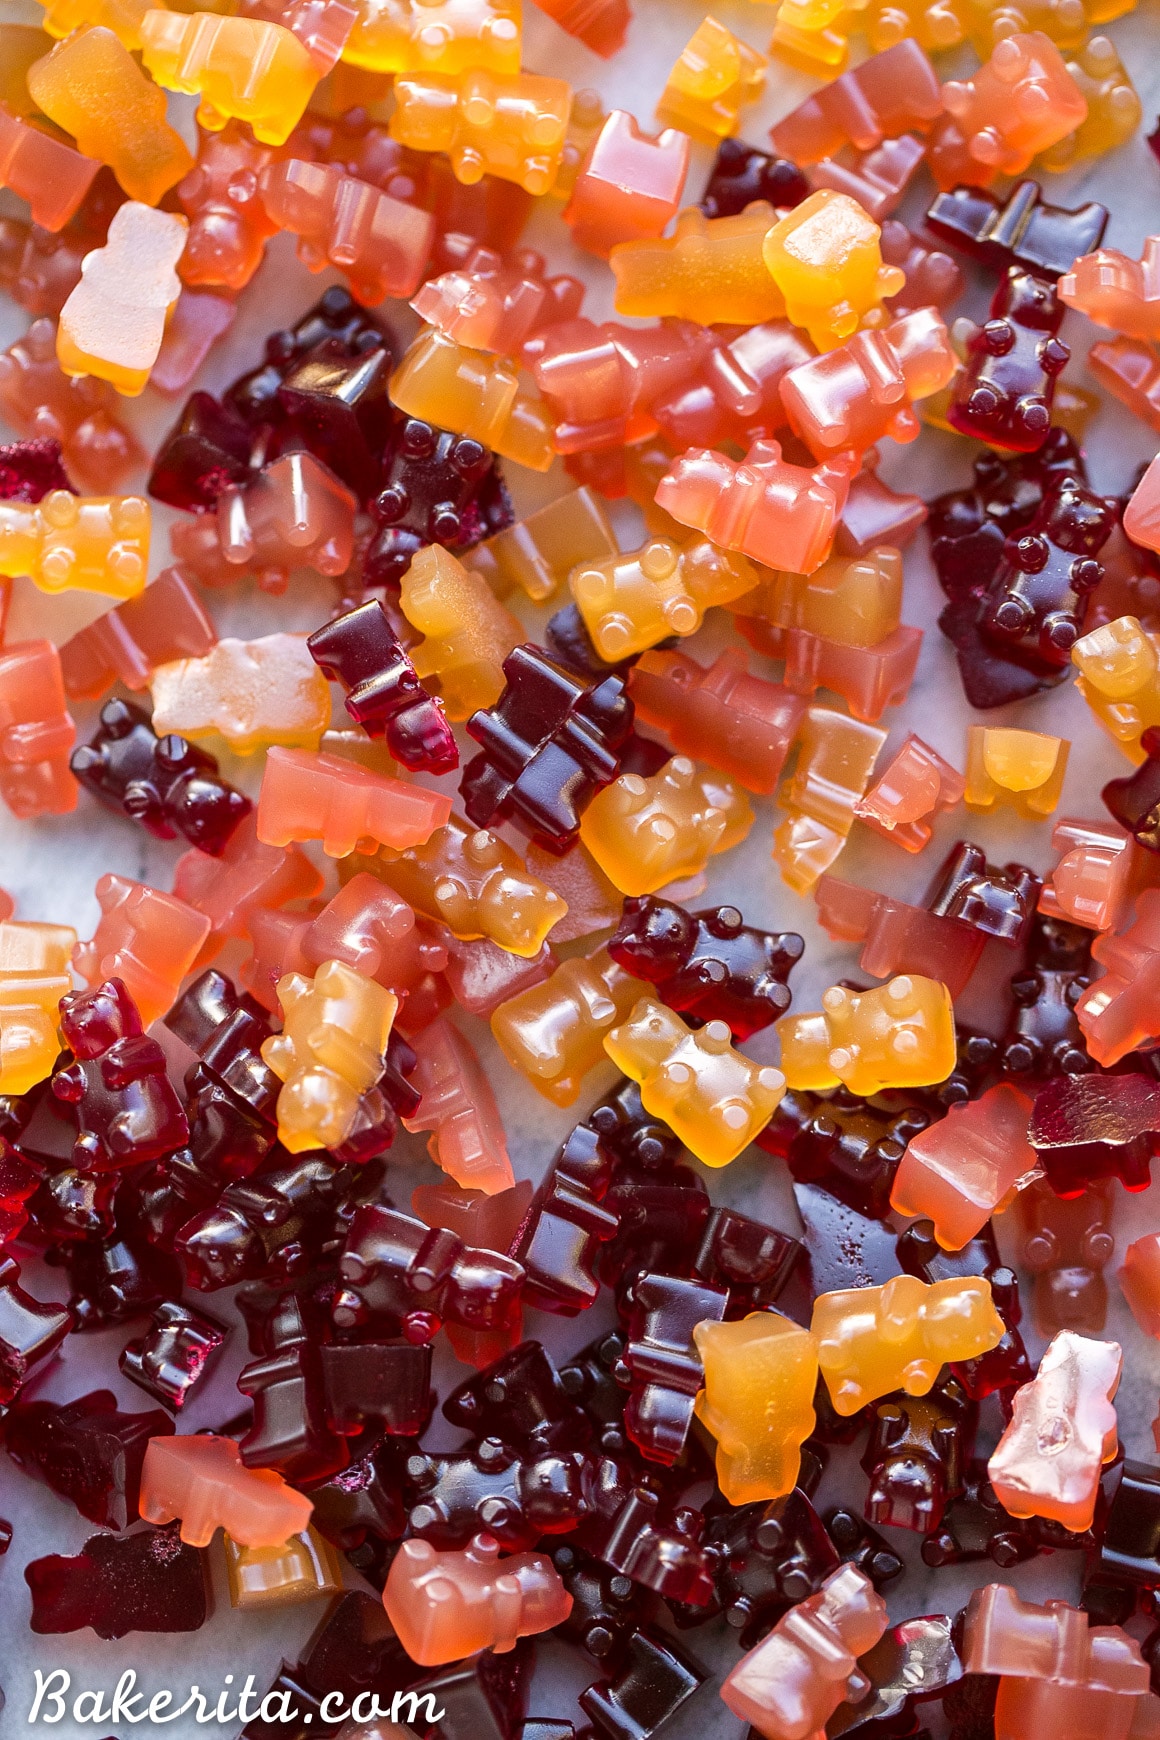 These Paleo Gummies couldn't be easier to make! The three flavors, Pomegranate, Apple Cinnamon, and Cranberry Orange, are flavored with fruit juice and made with gut-healing gelatin for a superfood boost. You can use any flavor of fruit juice you'd like to customize these to your tastes, too!